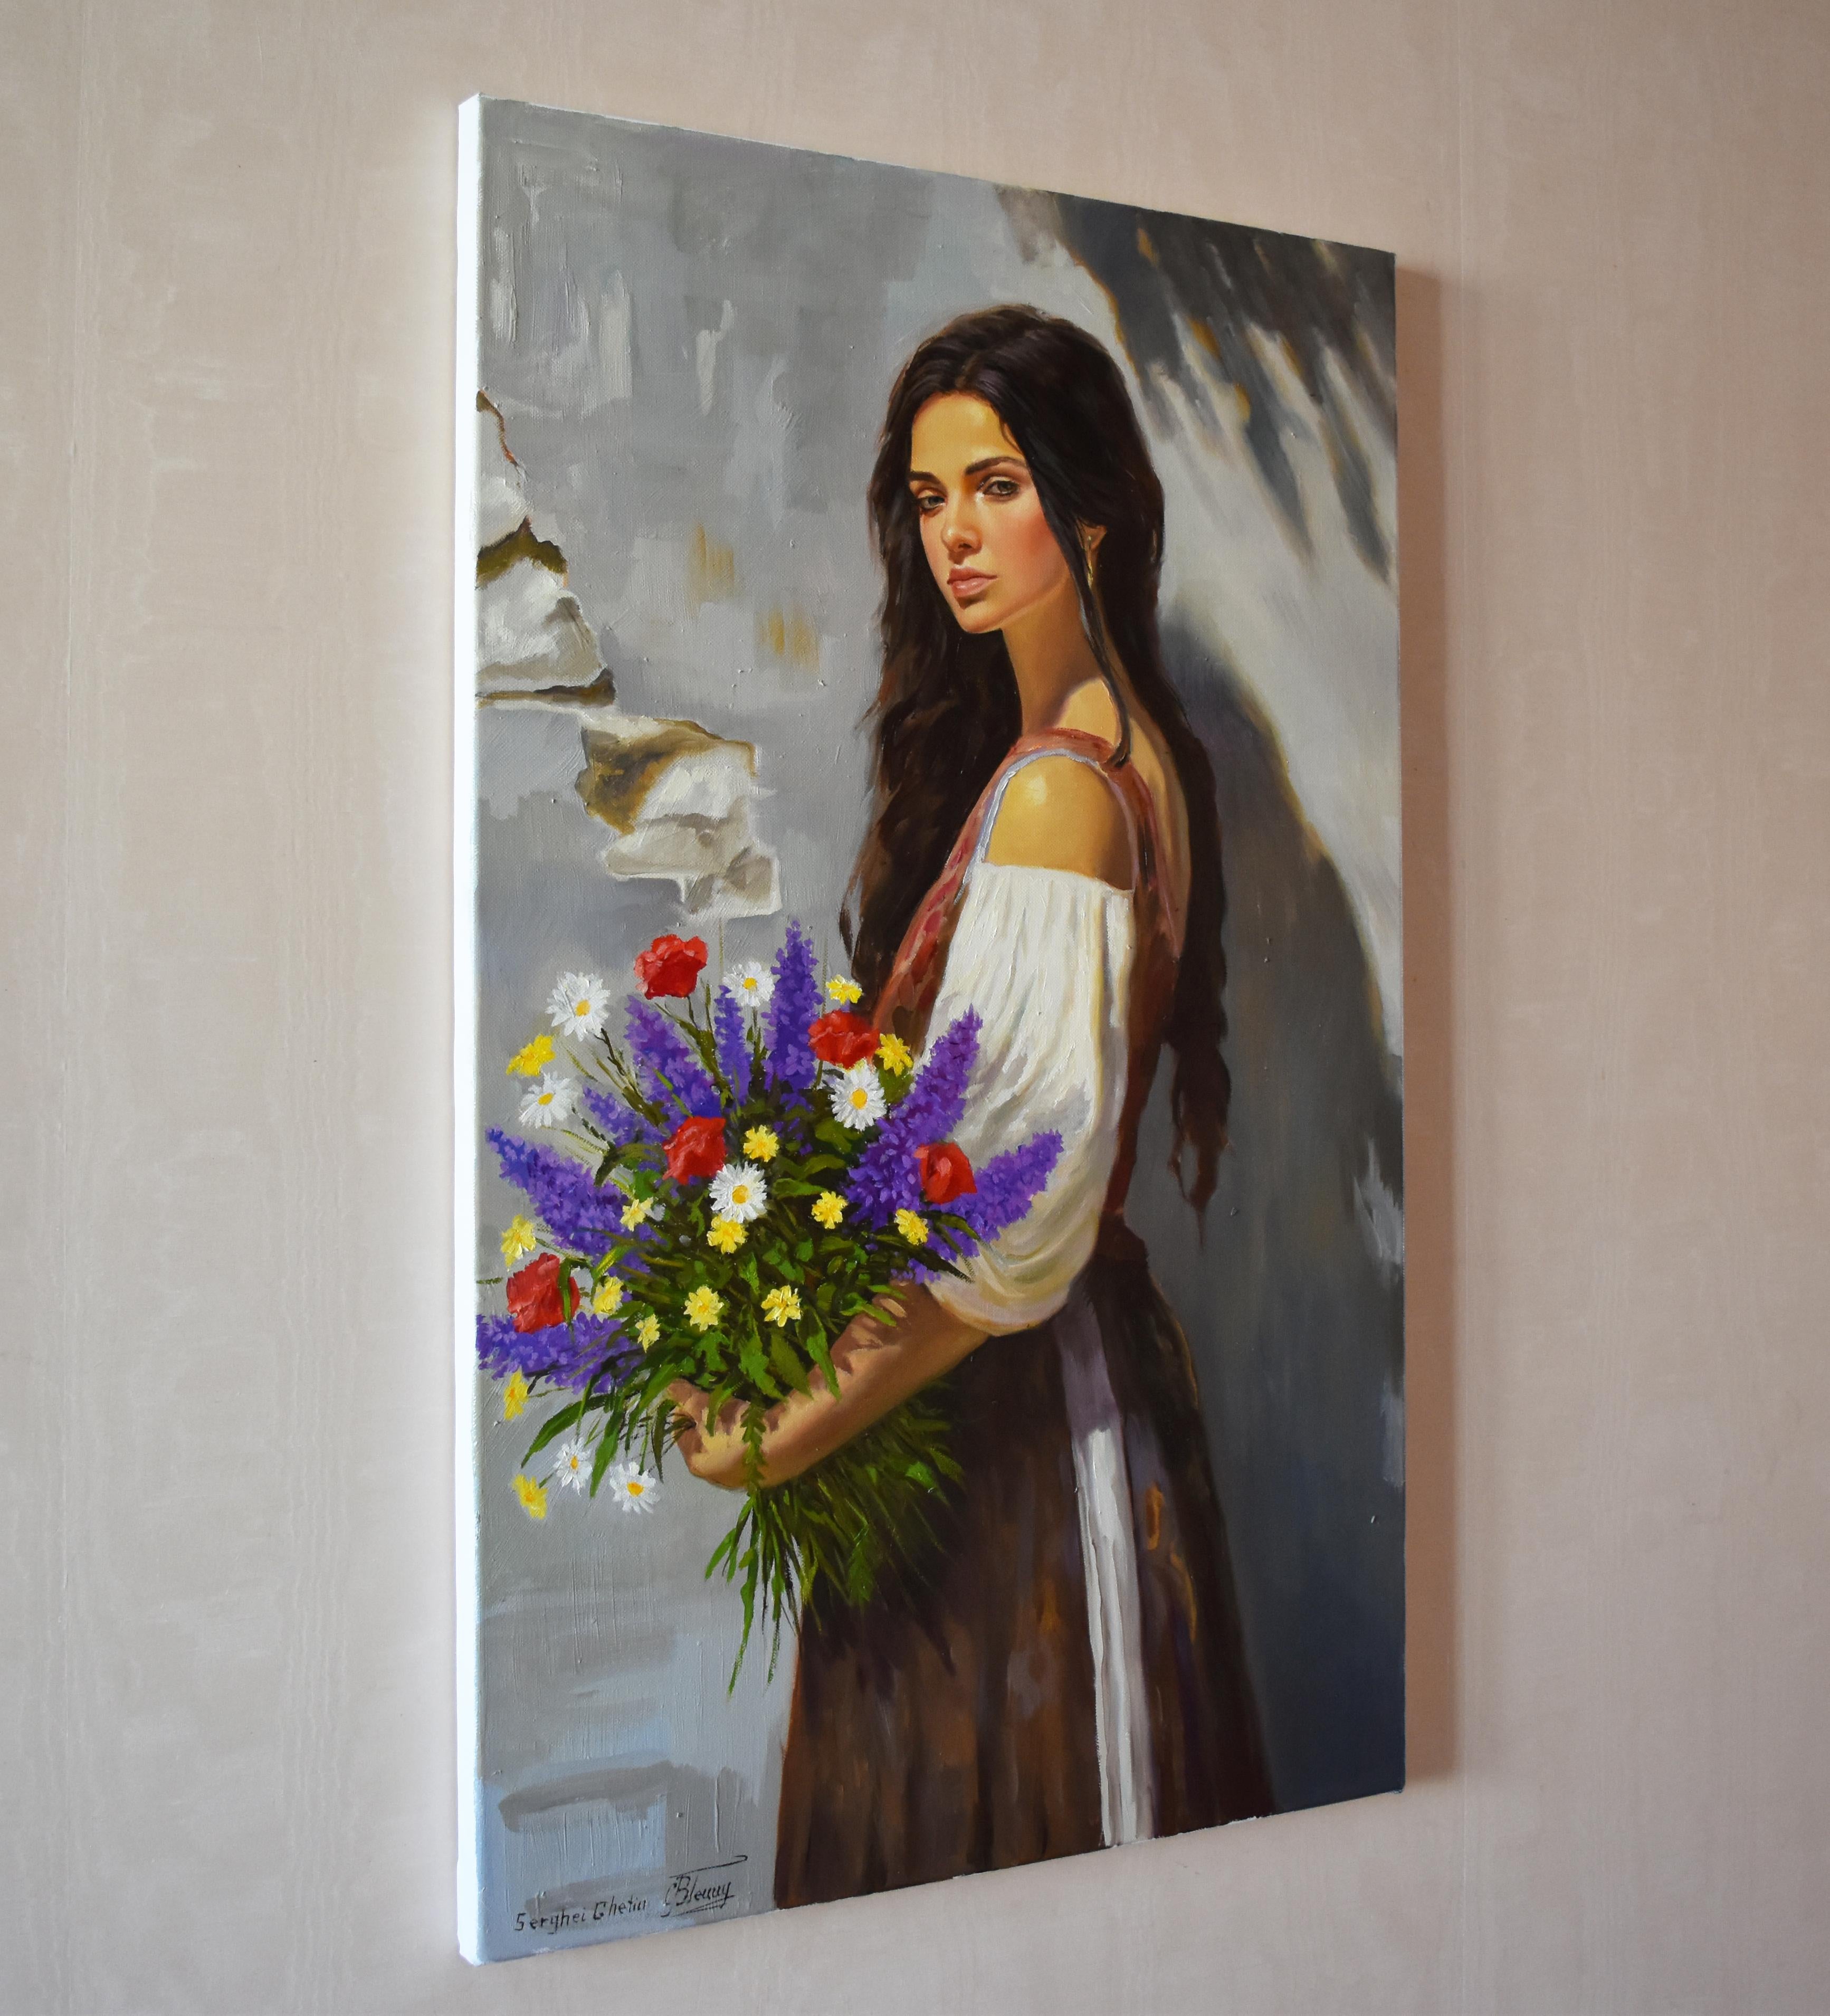 In this oil painting, I embraced the delicate dance of light and shadow, capturing the serene beauty of a woman holding a bouquet of wildflowers. Each stroke reflects a moment of tranquility and the profound connection between human and nature. Her